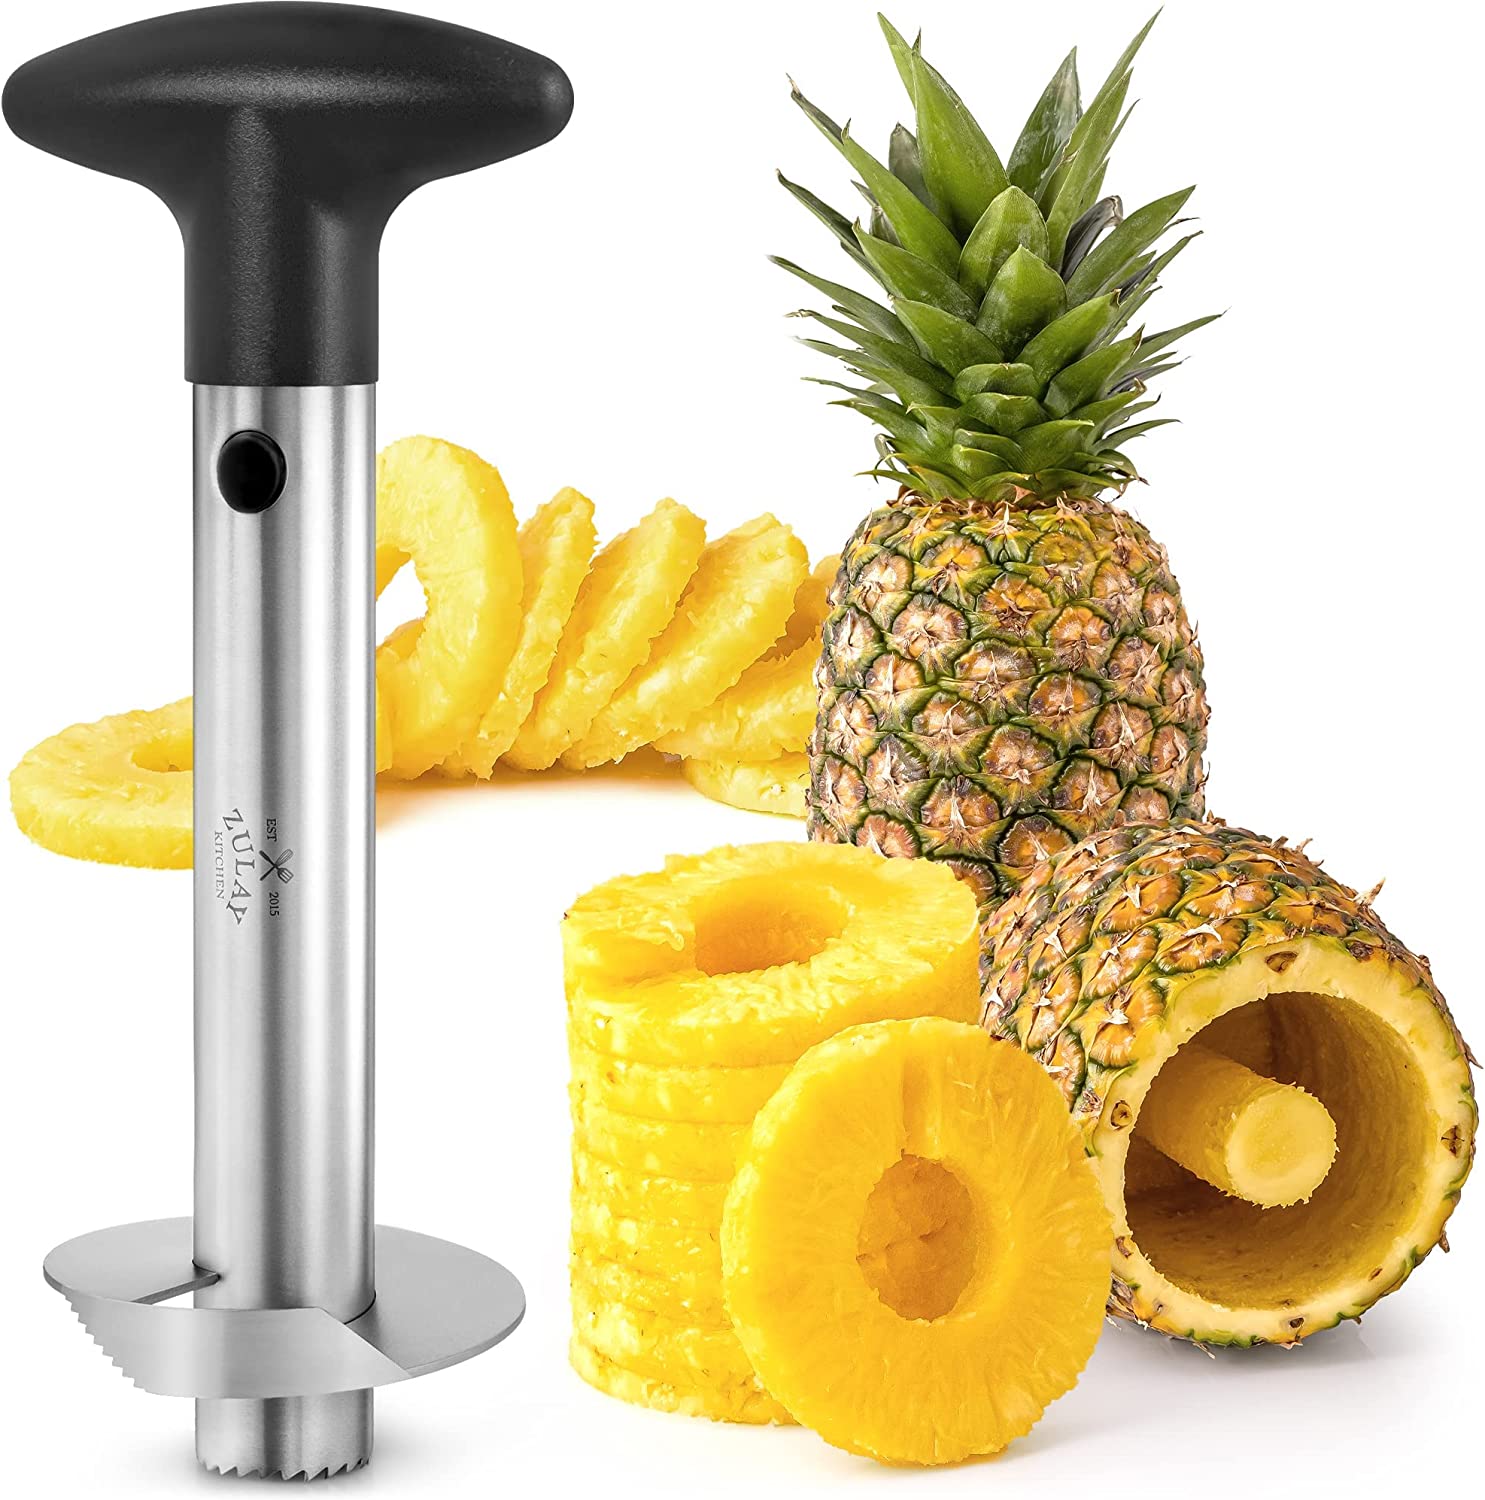 Zulay Kitchen Easy Use Reinforced Blade Pineapple Corer